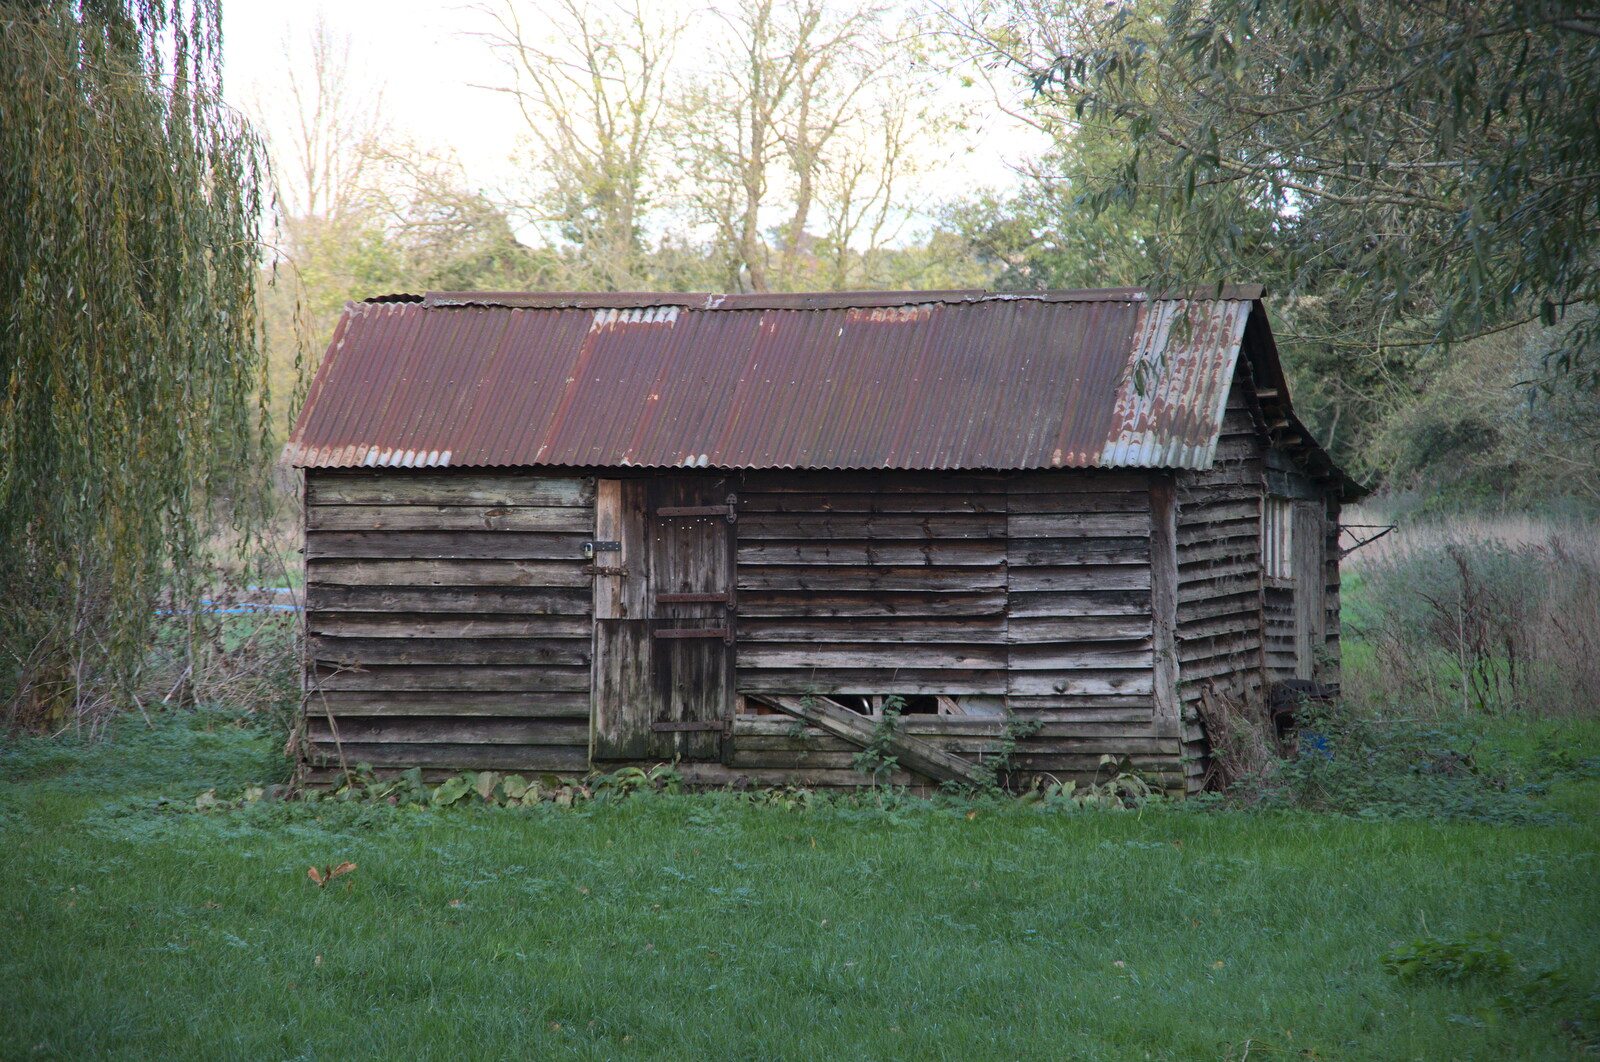 A Postcard from Flatford and Dedham, Suffolk and Essex, 9th November 2022: A derelict hut in a field